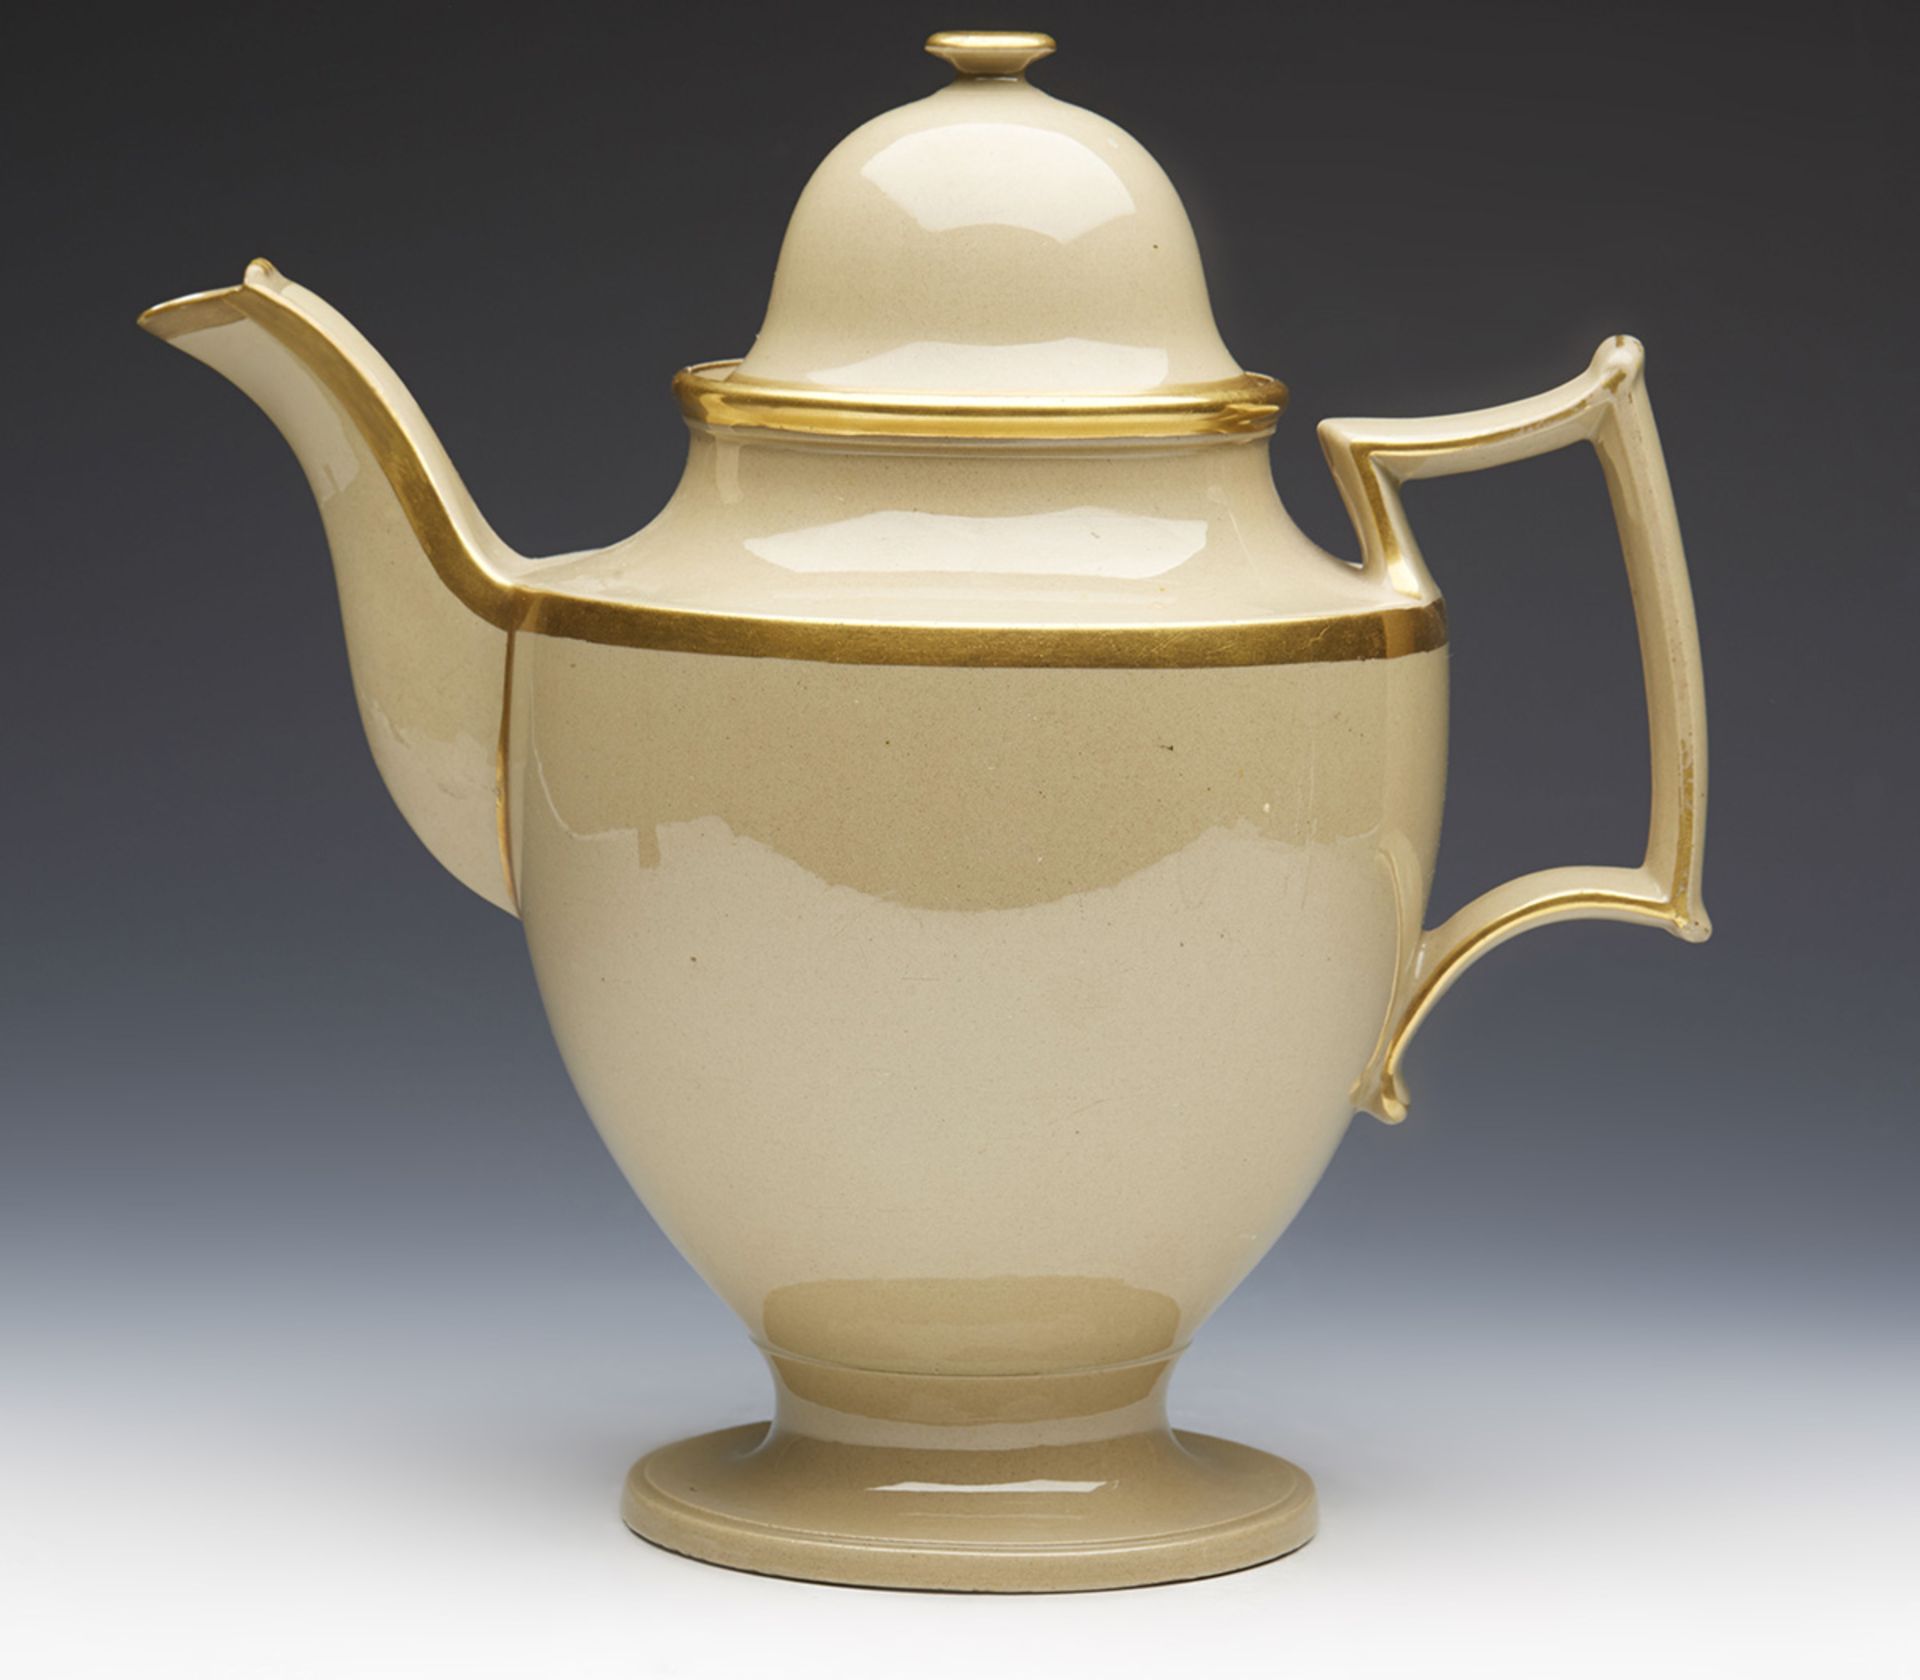 ANTIQUE ENGLISH DRABWARE TEAPOT POSSIBLY SPODE EARLY 19TH C   DIMENSIONS   Height 22,5cm, Width 22, - Image 5 of 8